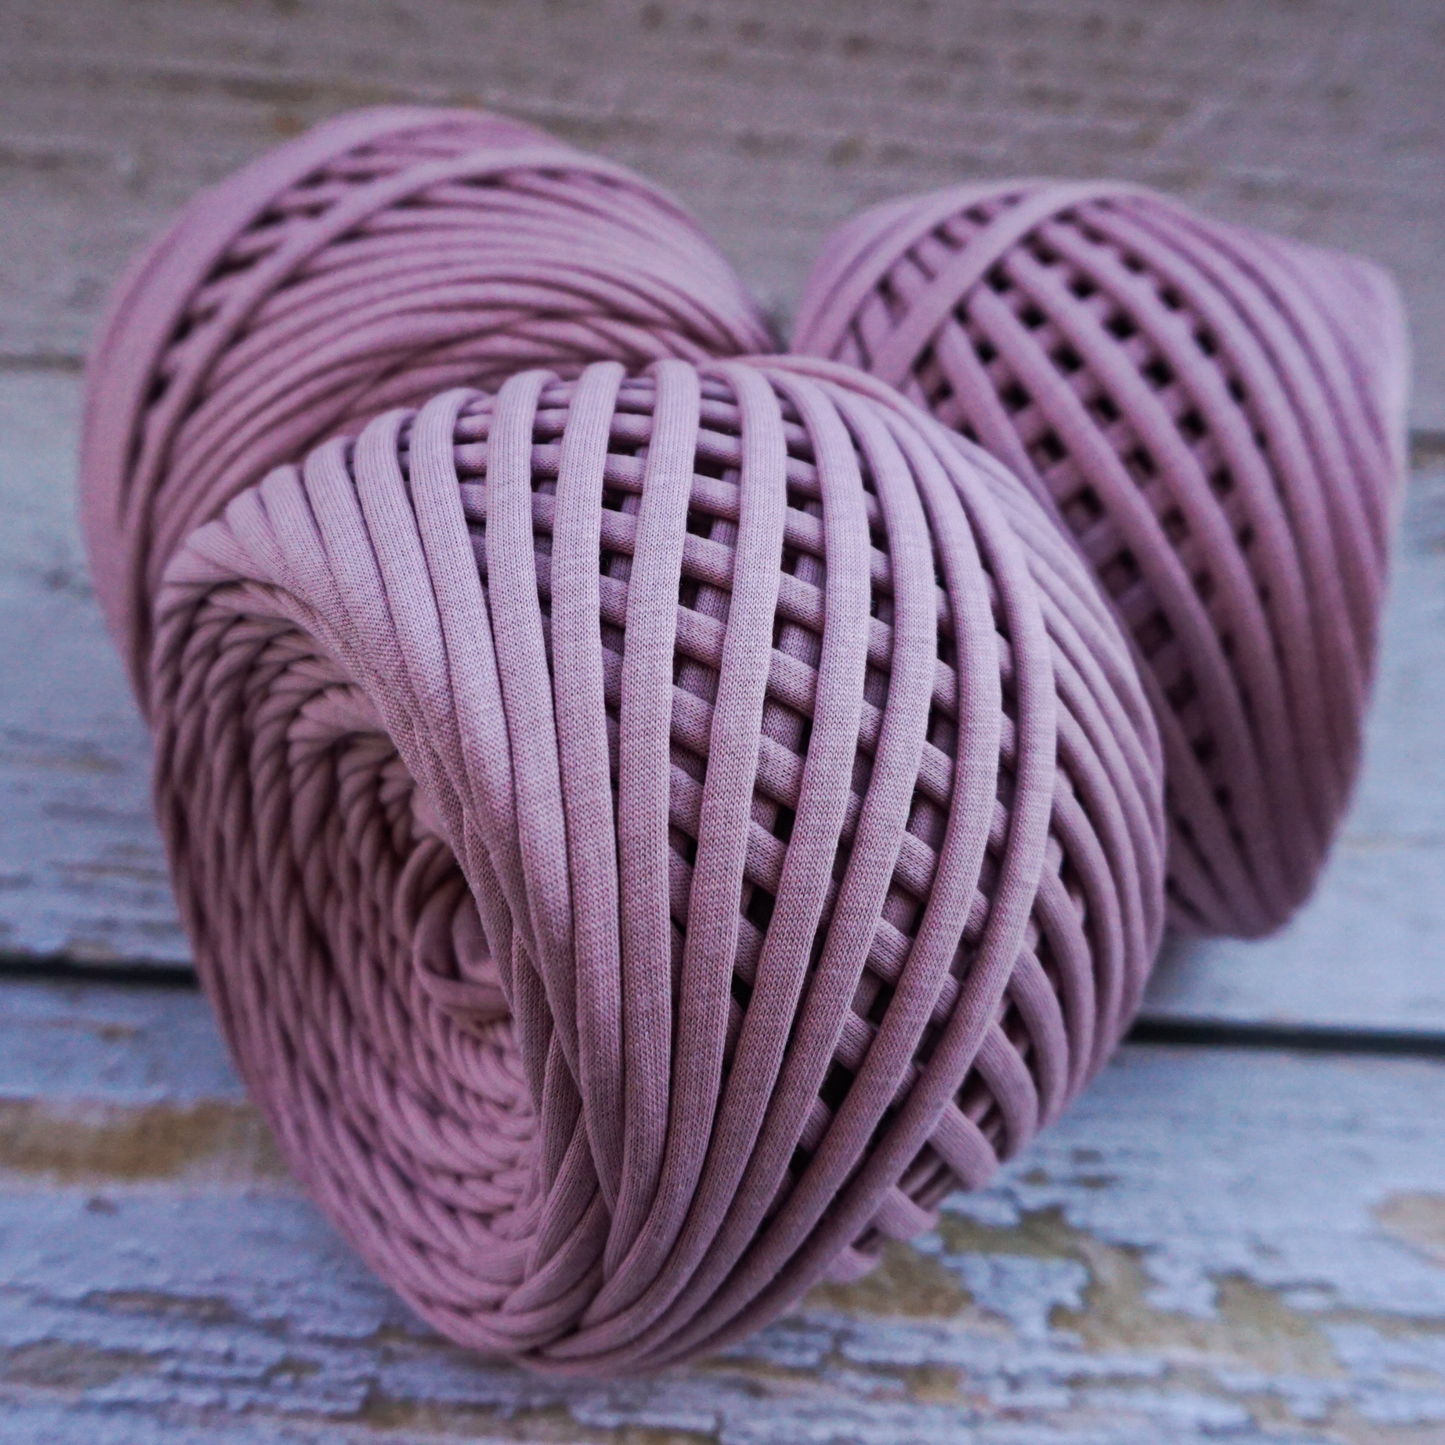 T-shirt yarn for crocheting baskets, bags, rugs and home decor. Dust rose